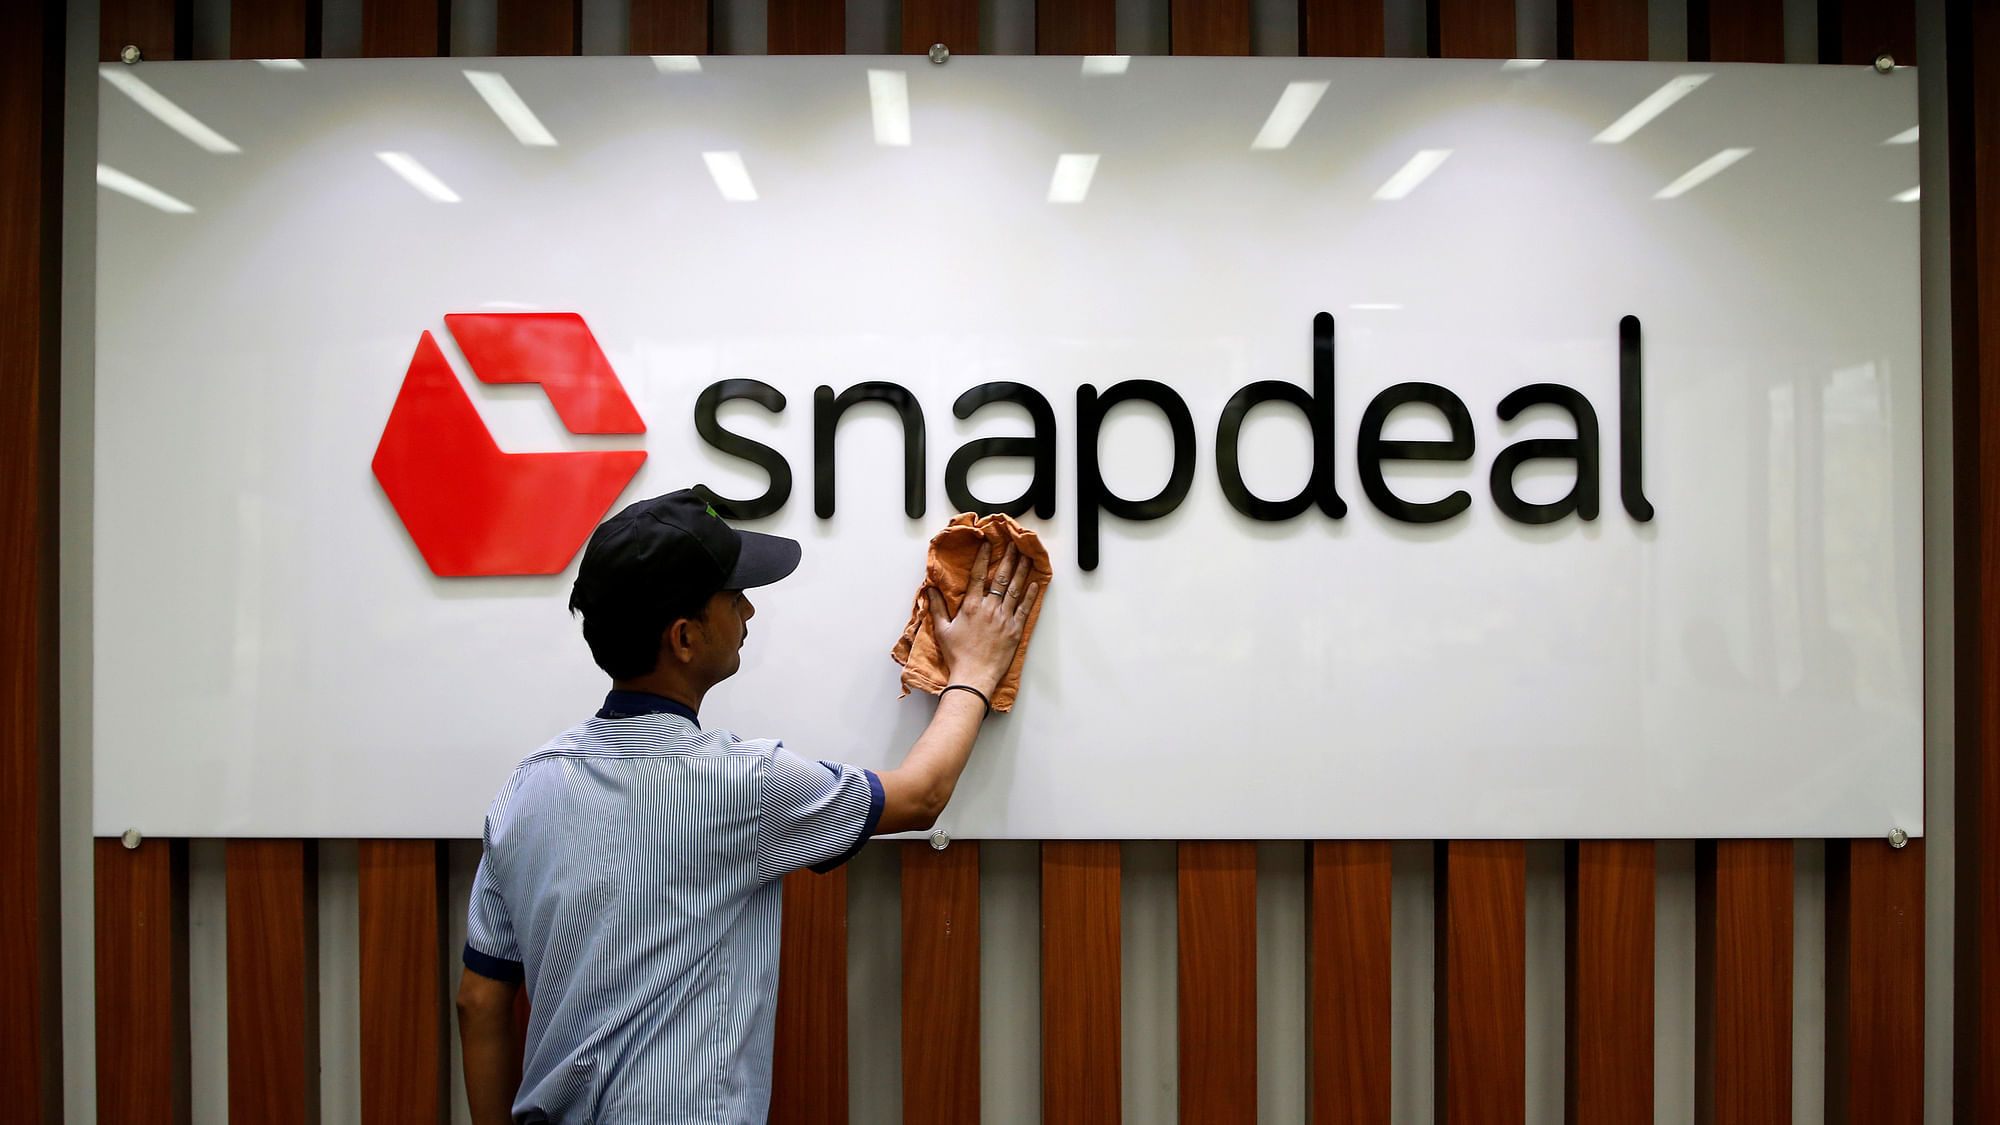 An employee cleans a Snapdeal logo at its headquarters in Gurugram. (Photo: Reuters)